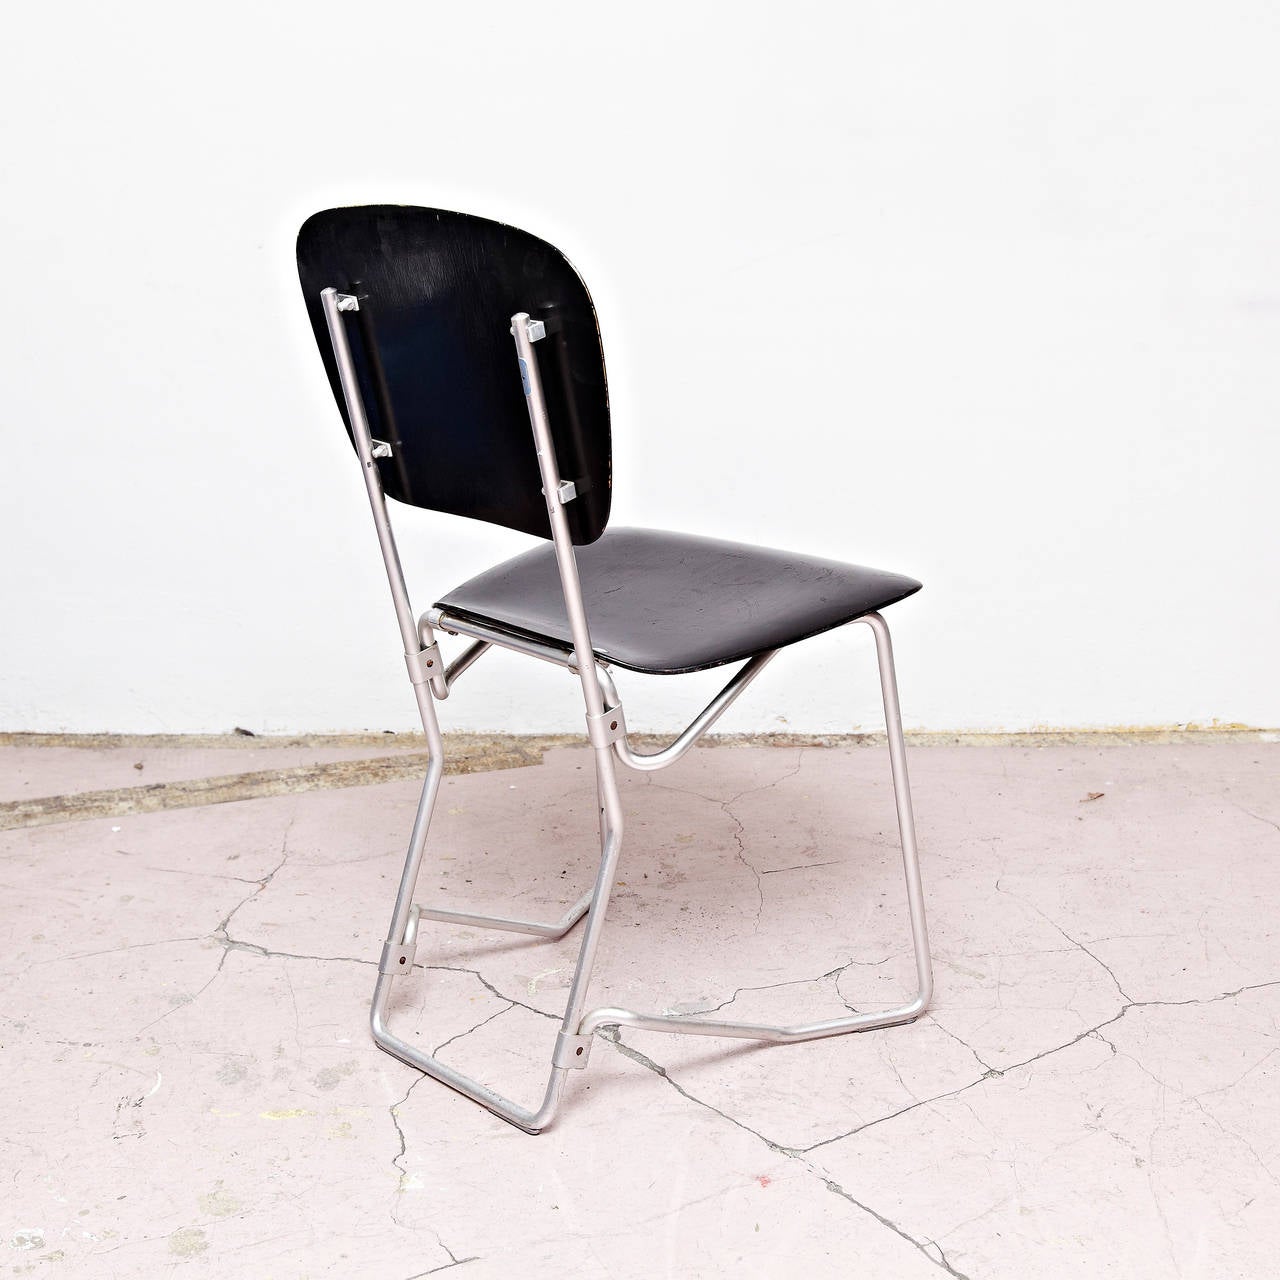 Stackable Aluflex chairs designed by Armin Wirth
Manufactured by Aluflex, Switzerland, circa 1950. 

In good original condition, with minor wear consistent with age and use, preserving a beautiful patina.

2 chairs available.